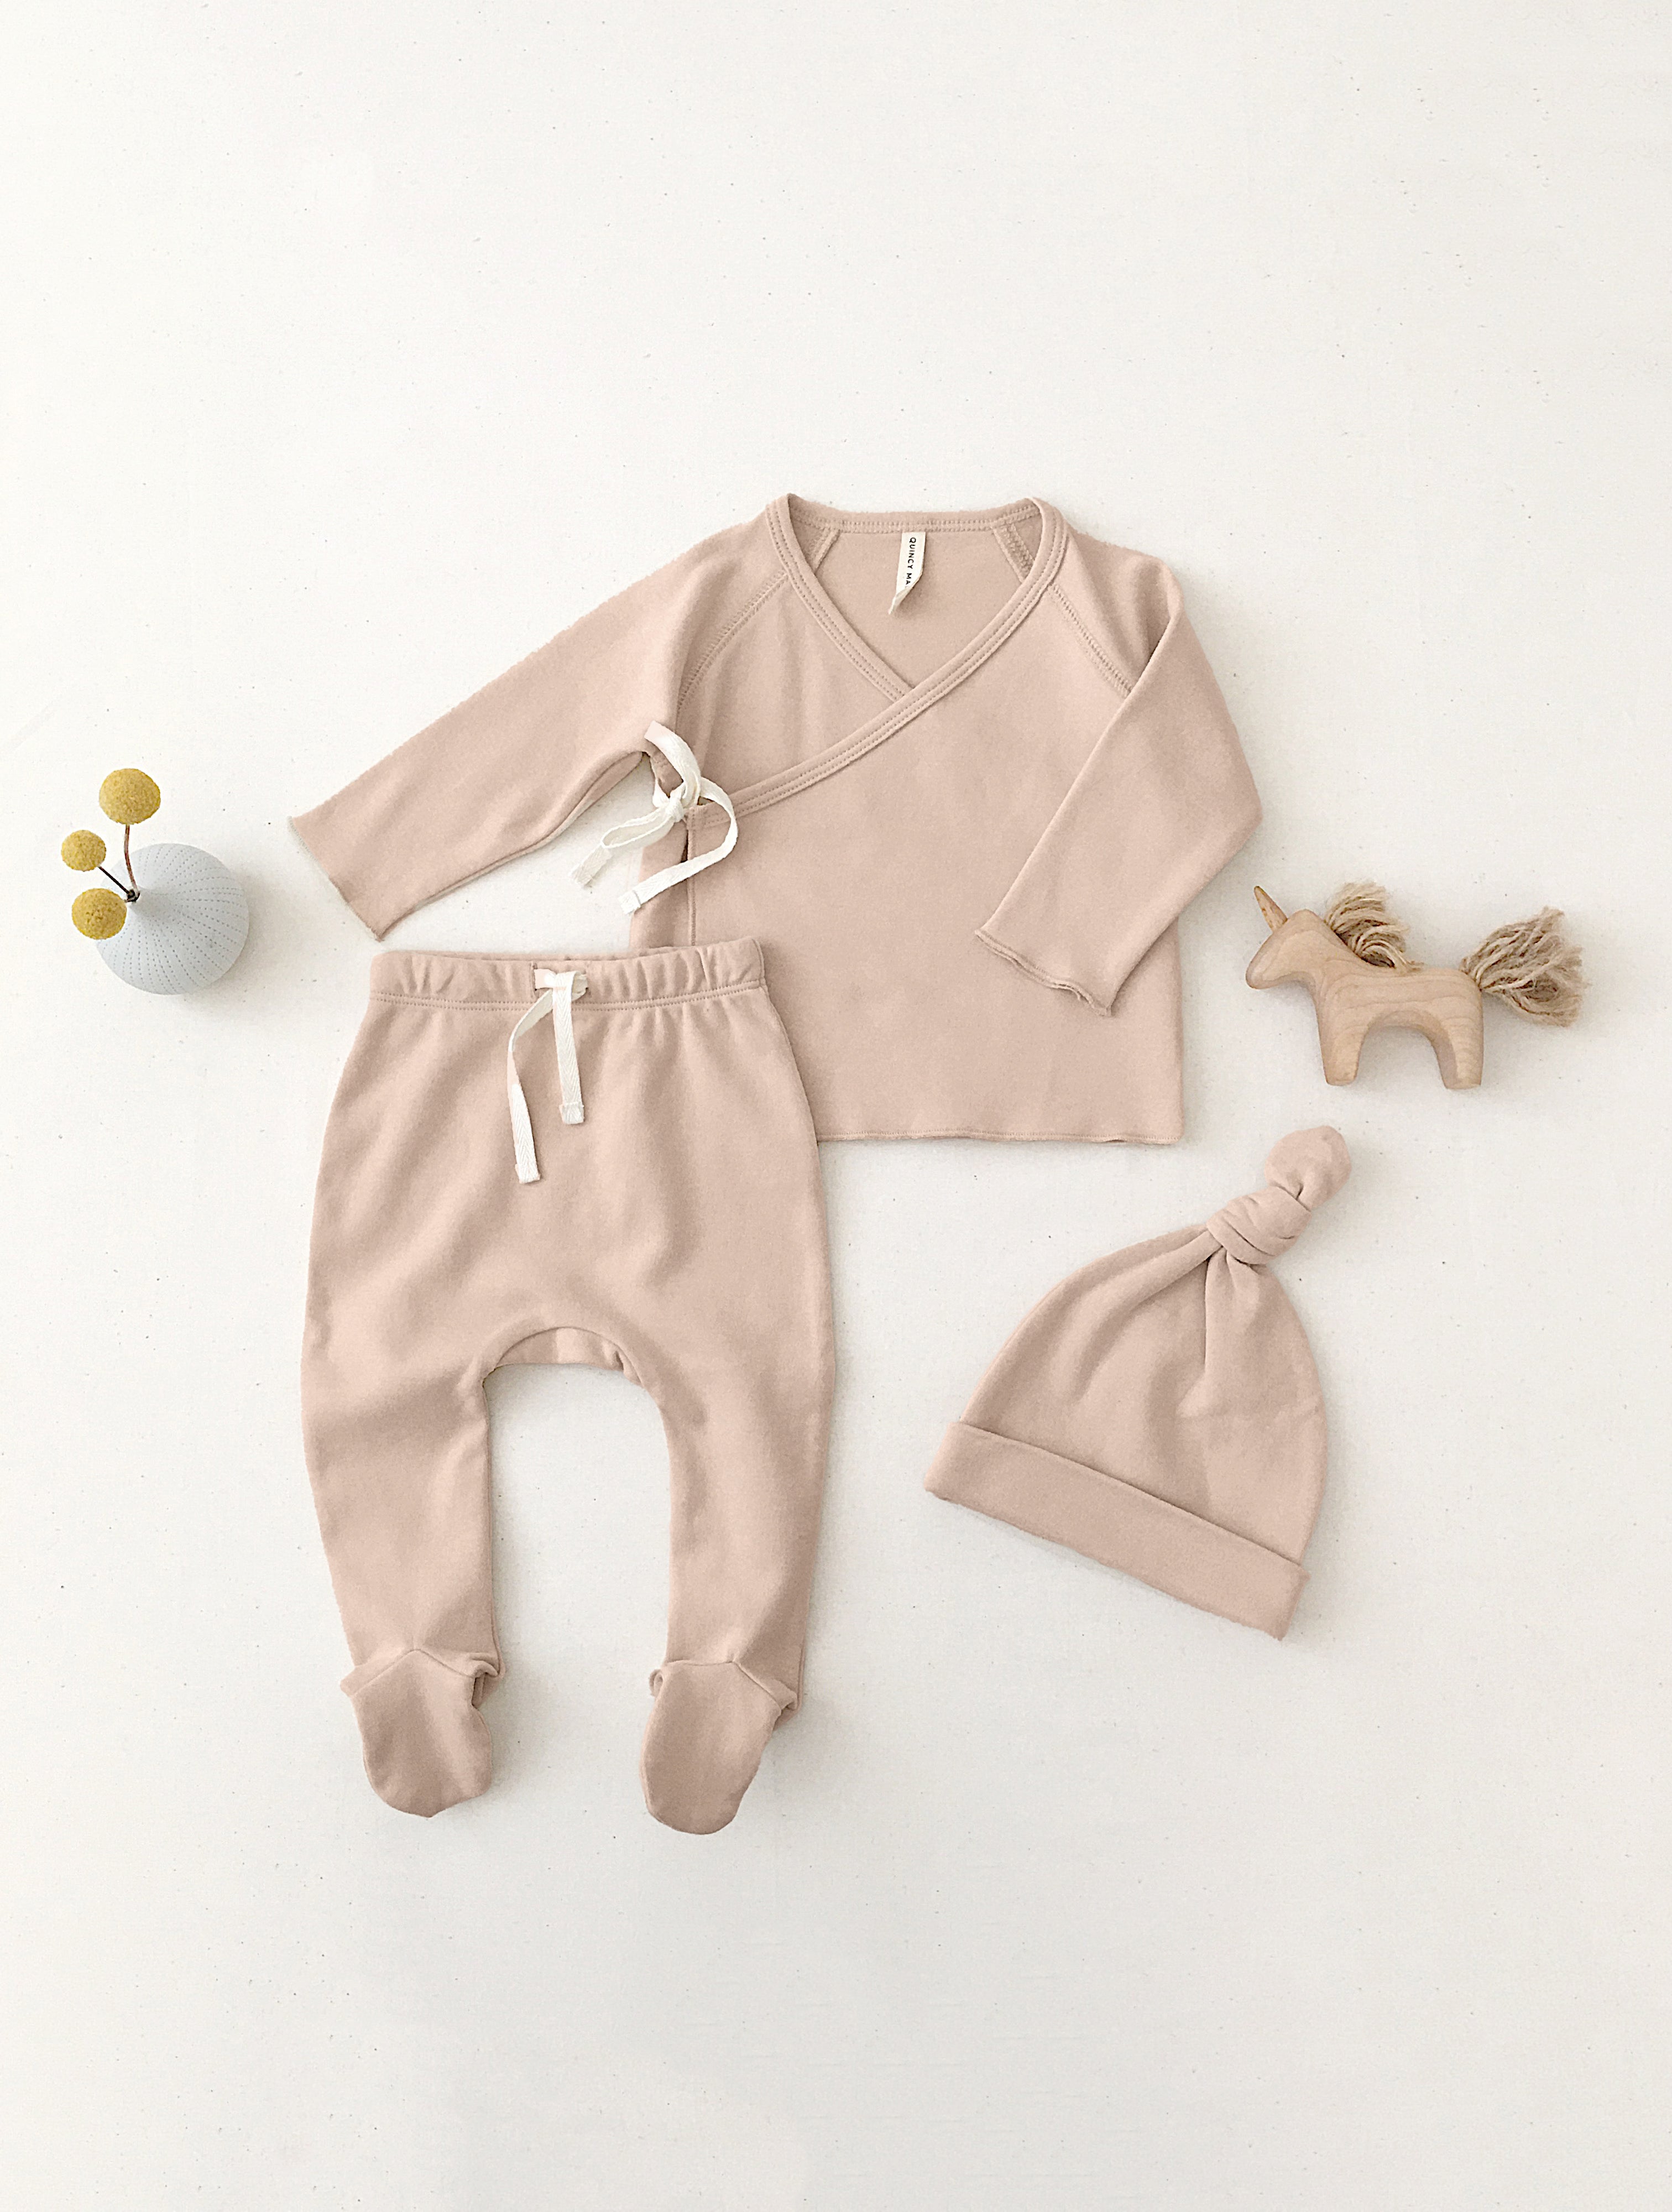 Wrap Top + Footed Pant Set || Blush - Rylee + Cru | Kids Clothes | Trendy Baby Clothes | Modern Infant Outfits |